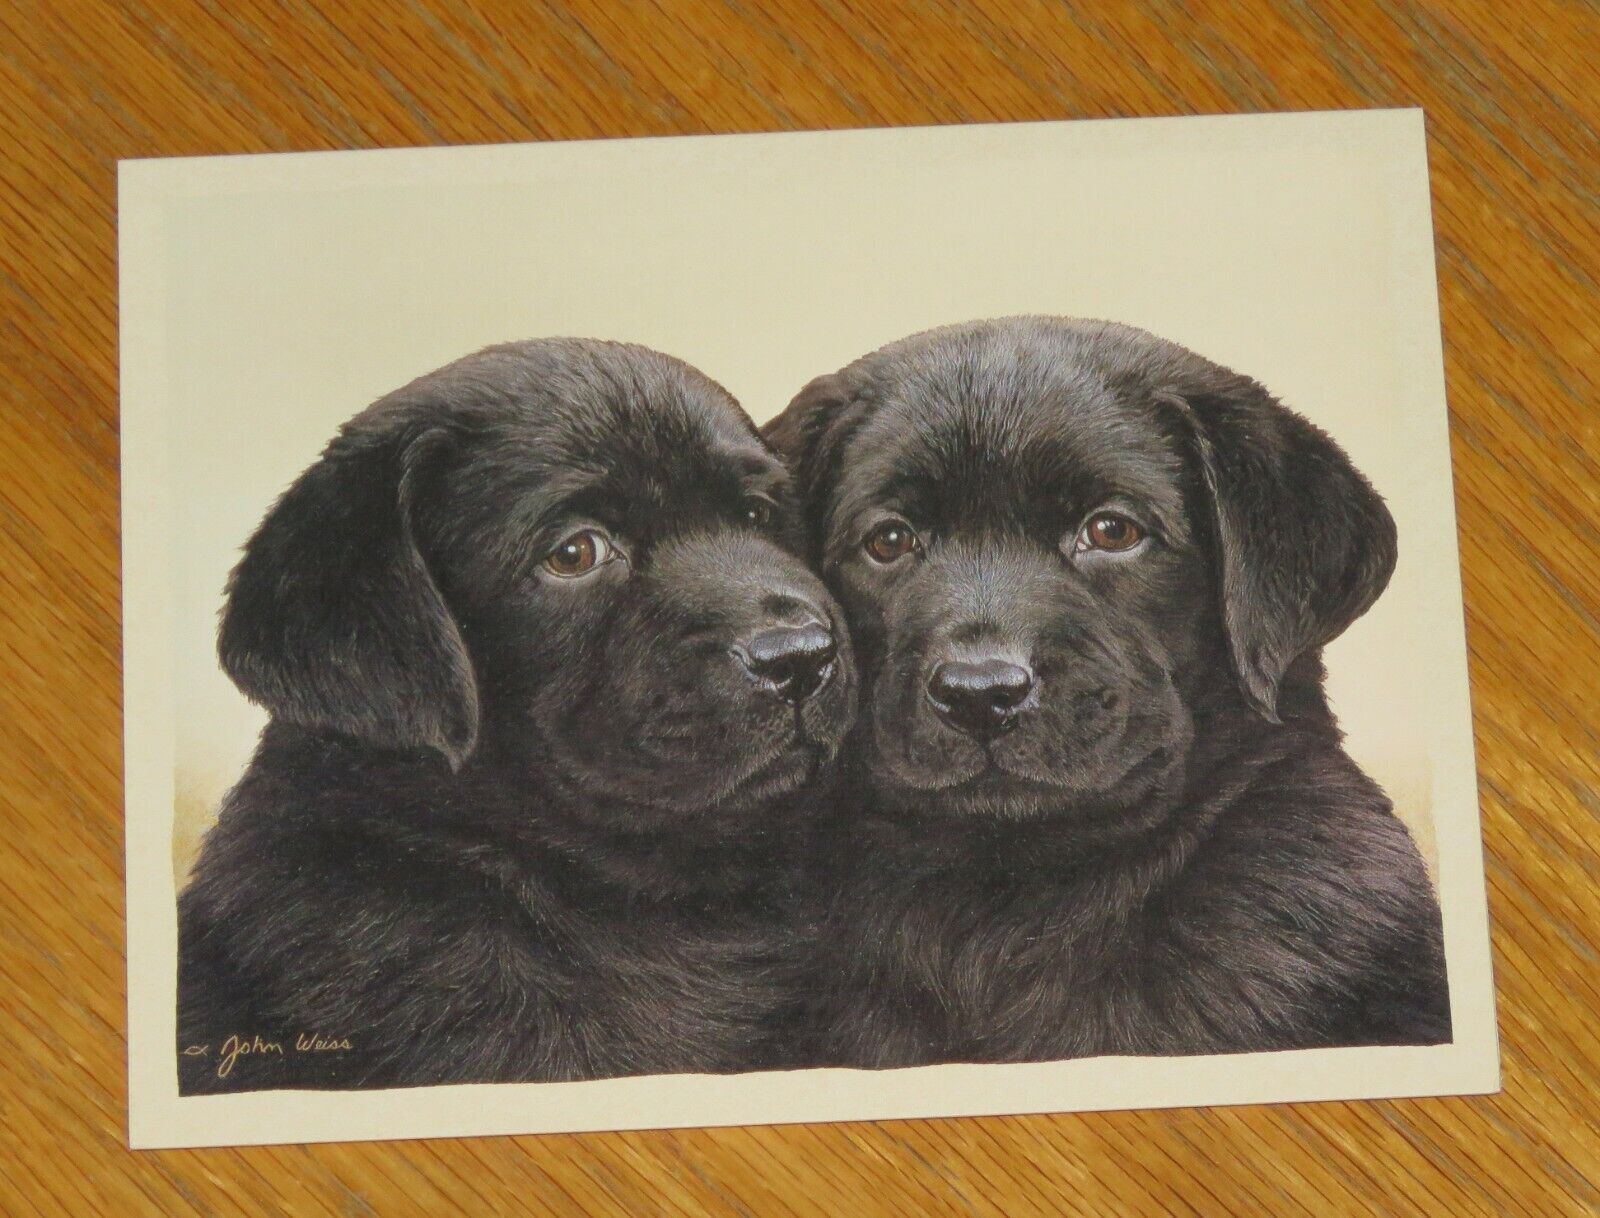 John Weiss Art - Double Trouble - Vintage Lang 5 x 6 Note Card 4ct - Puppy Dog